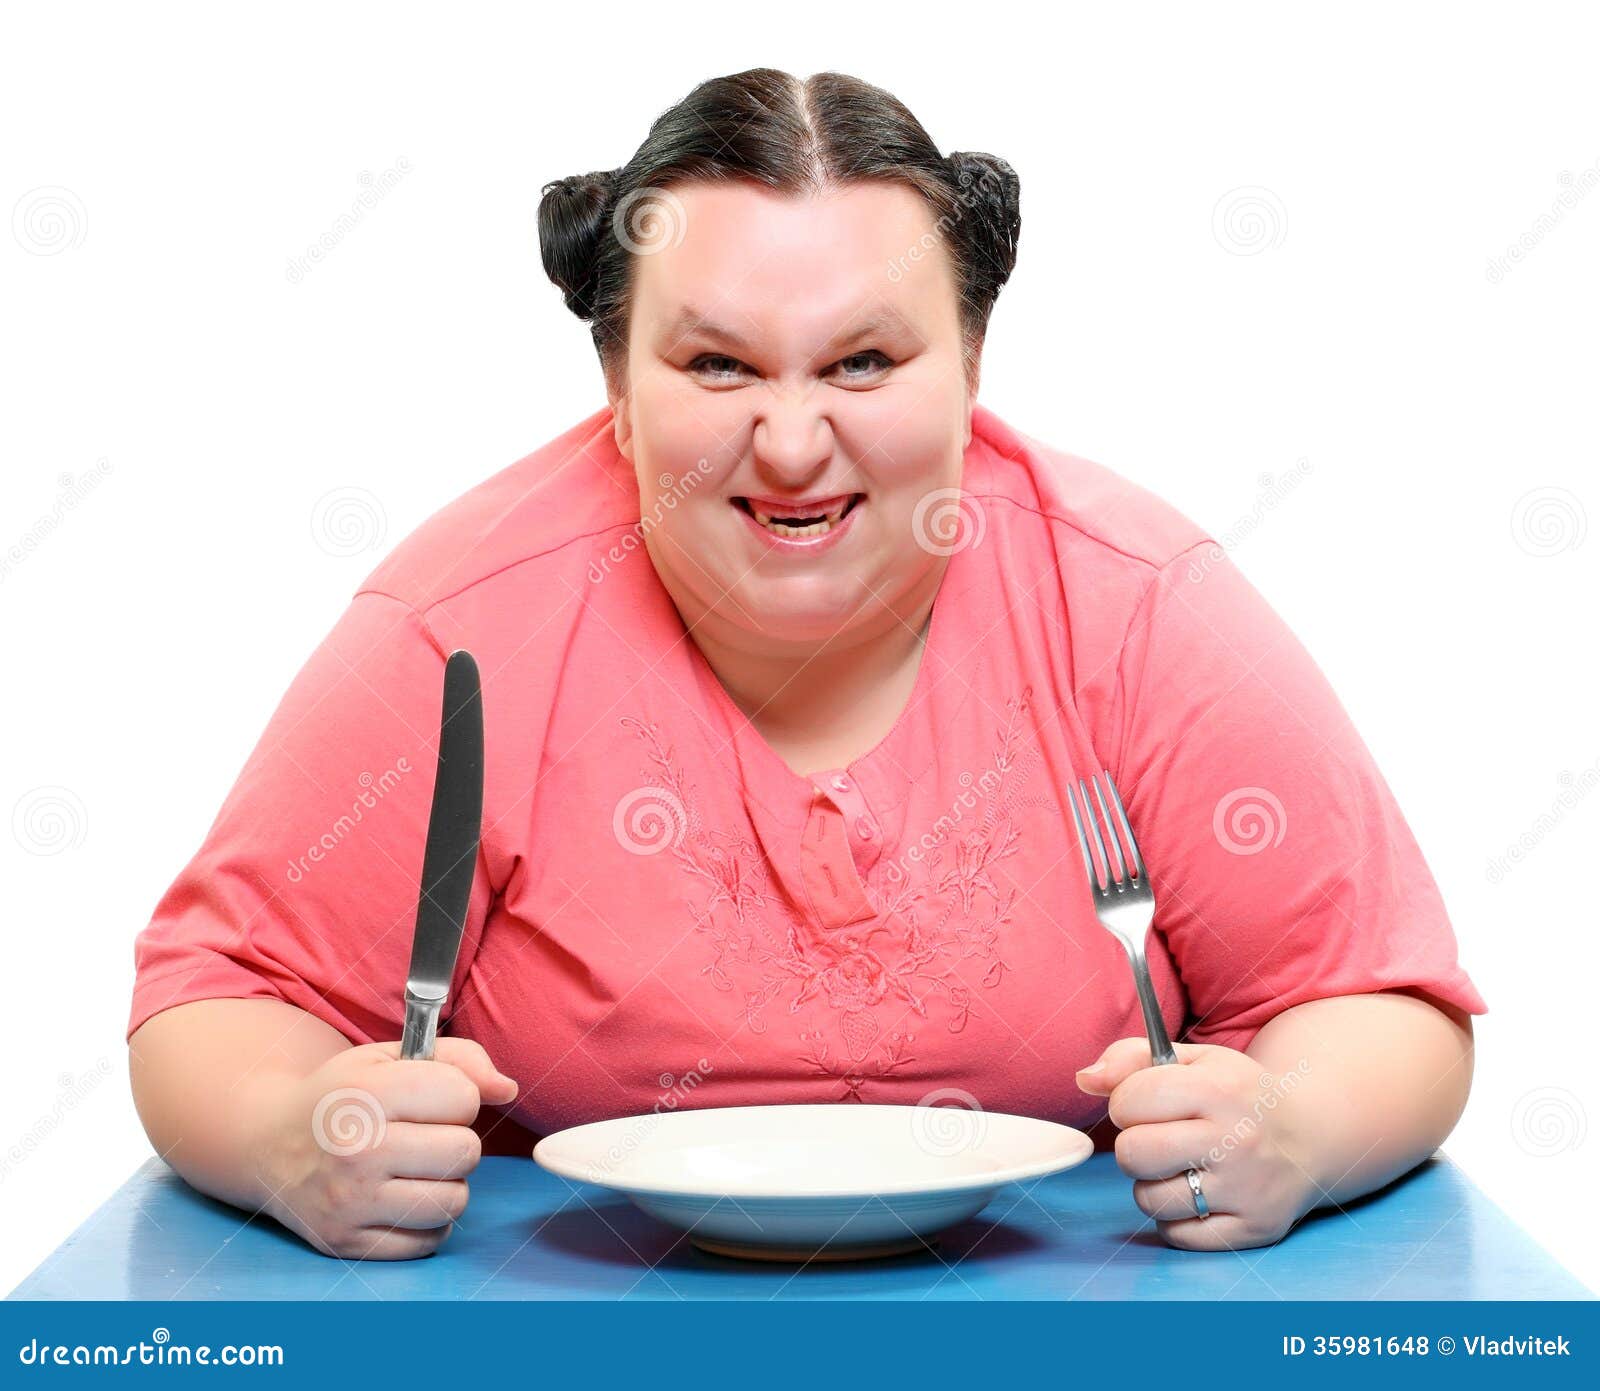 3,978 Obese Funny Stock Photos - Free & Royalty-Free Stock Photos from  Dreamstime